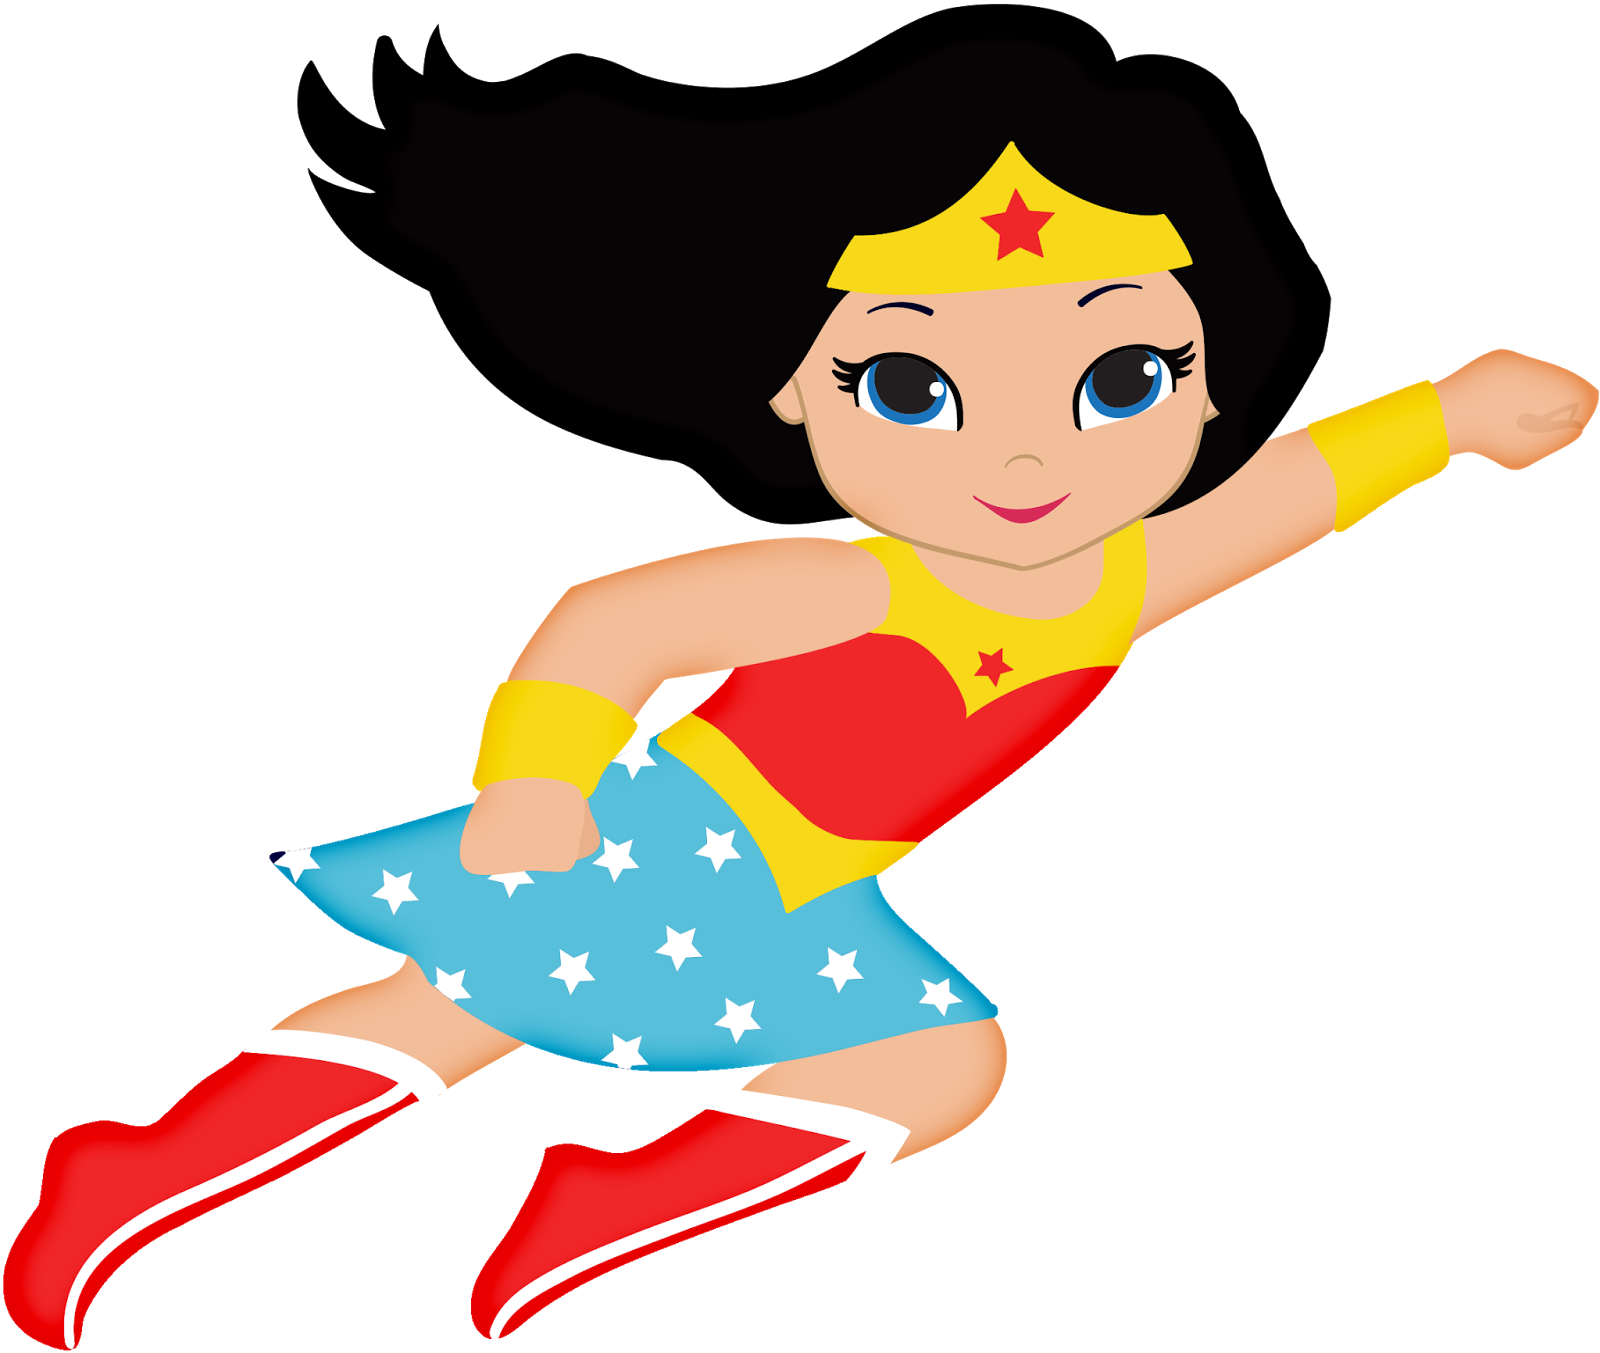 Wonder Woman Baby Clipart. | Oh My Fiesta! for Geeks